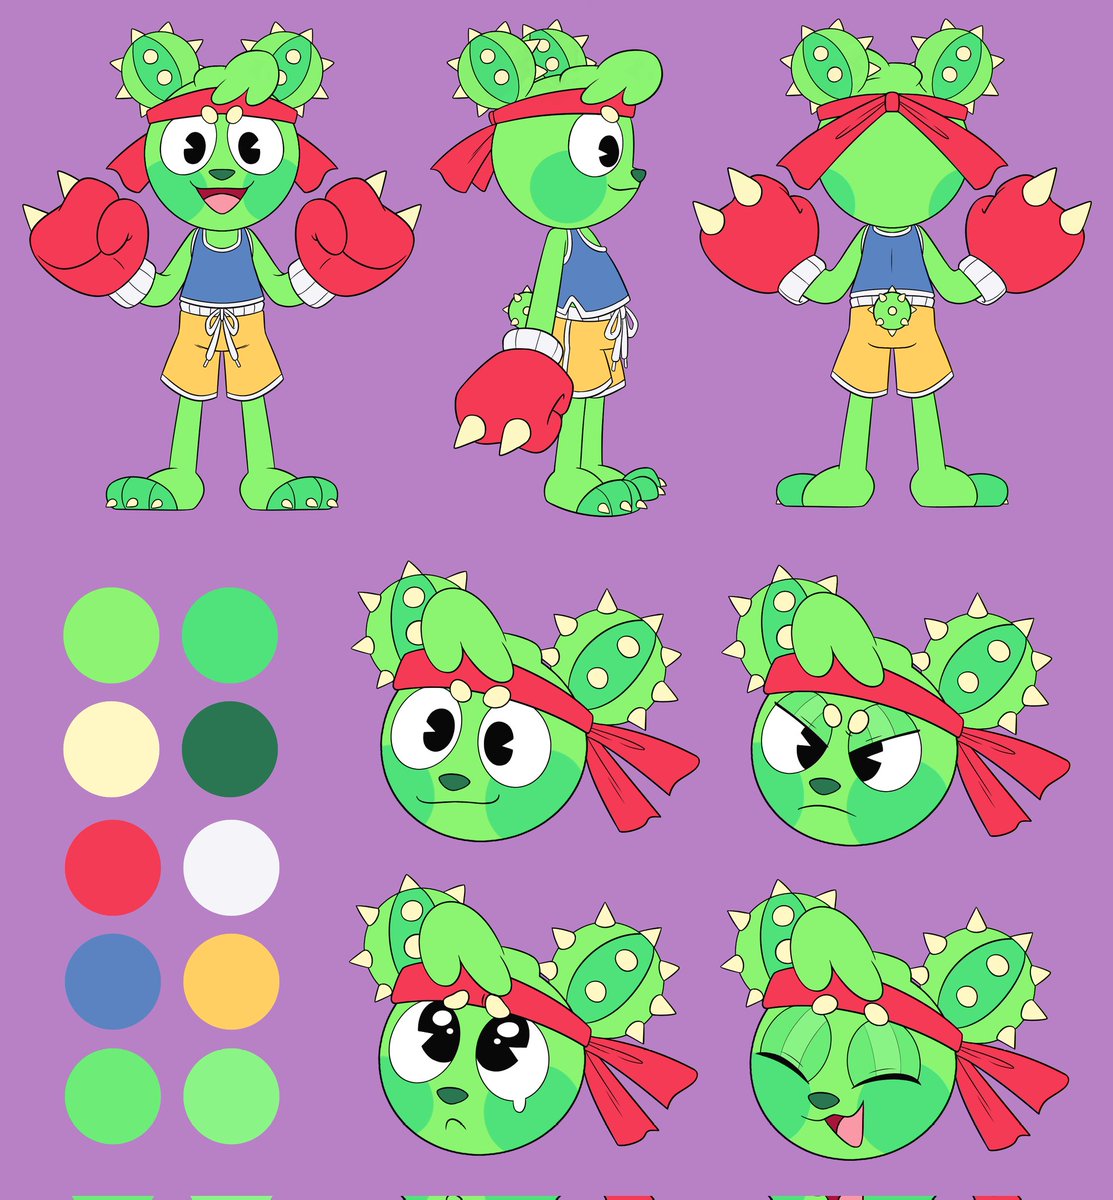 「Ref sheet for  」|ToonedToonsのイラスト